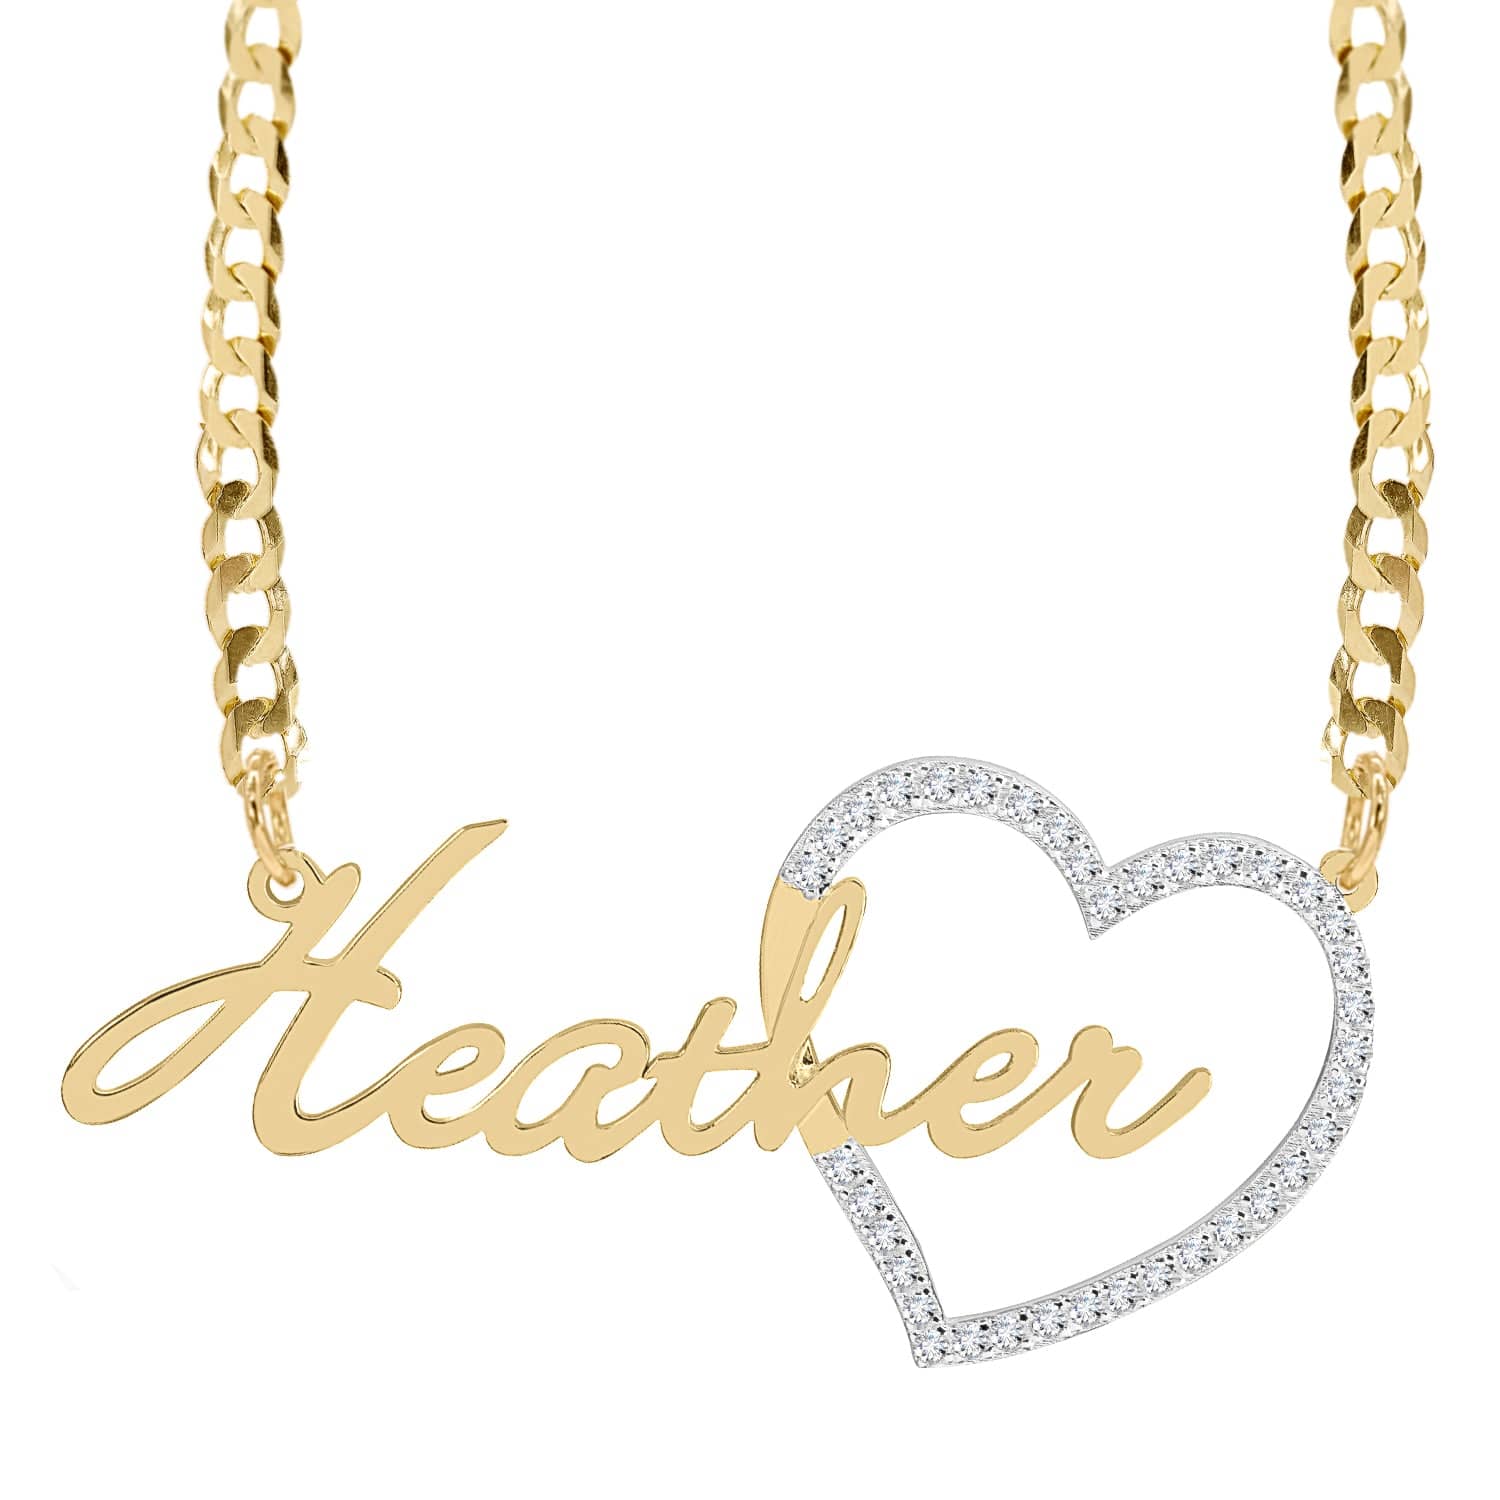 14k Gold over Sterling Silver / Cuban Chain Single Plated Nameplate Necklace "Heather" with Stones Heart